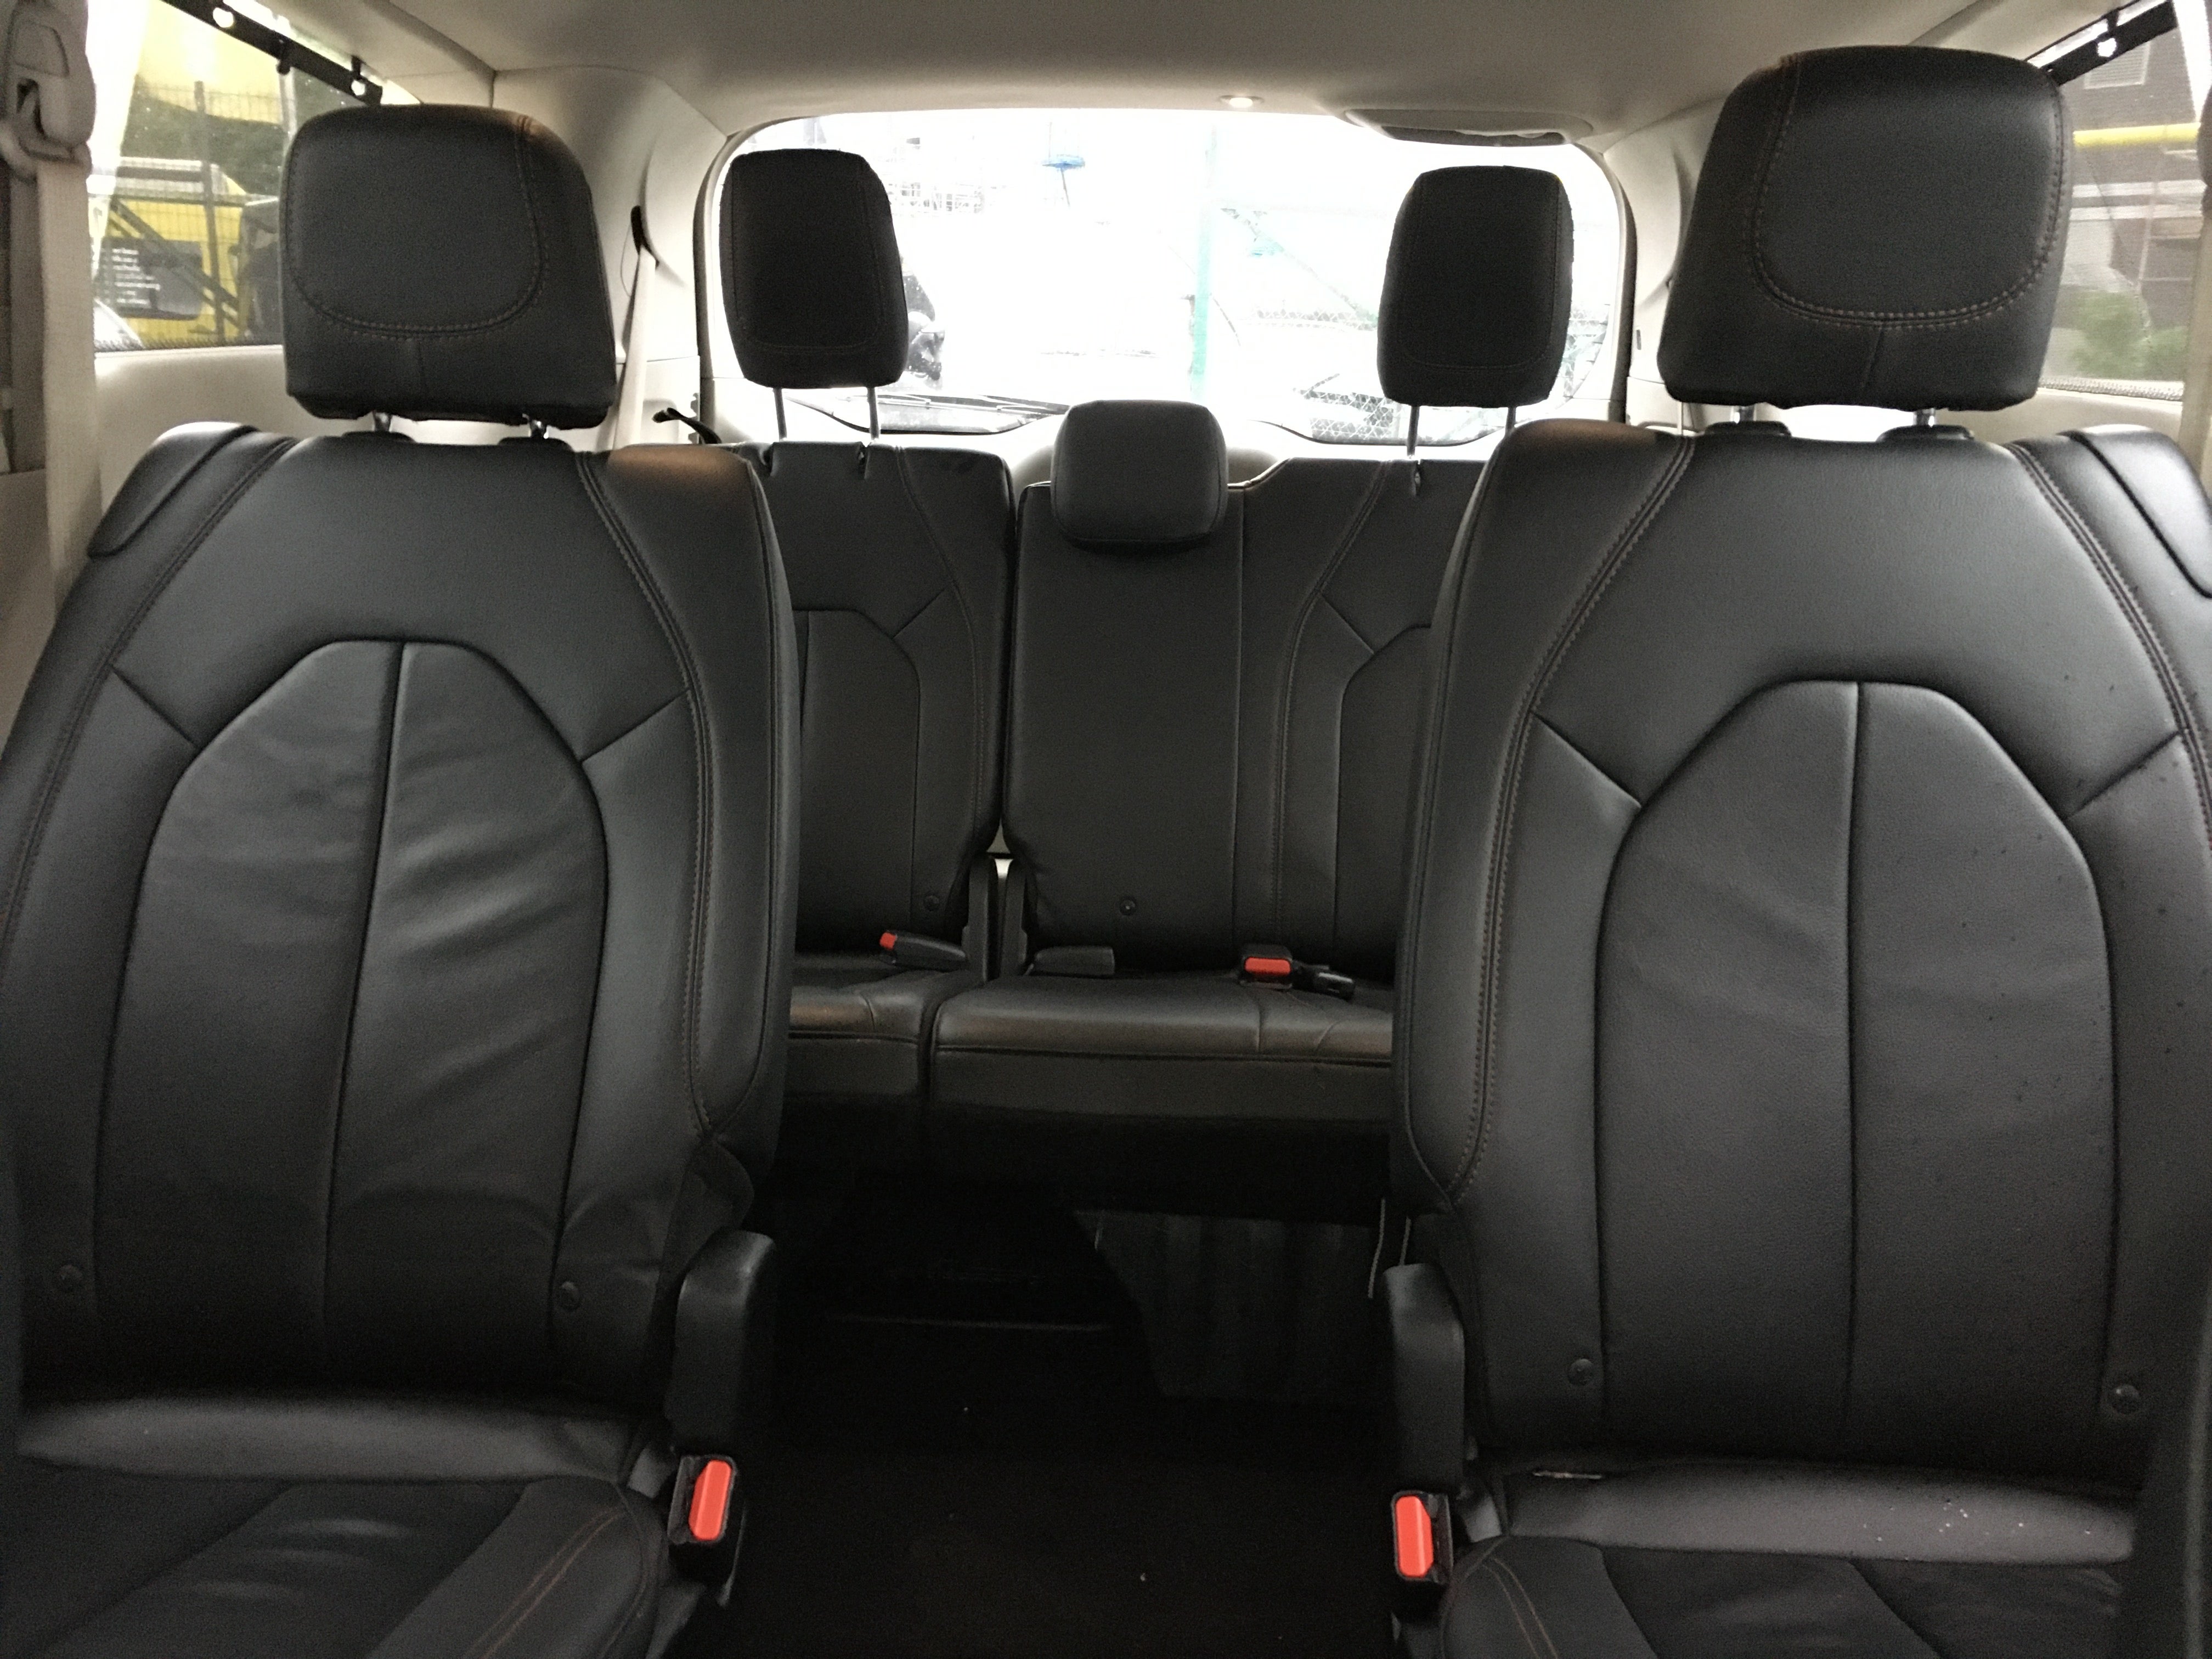 2019 chrysler pacifica 8 seater